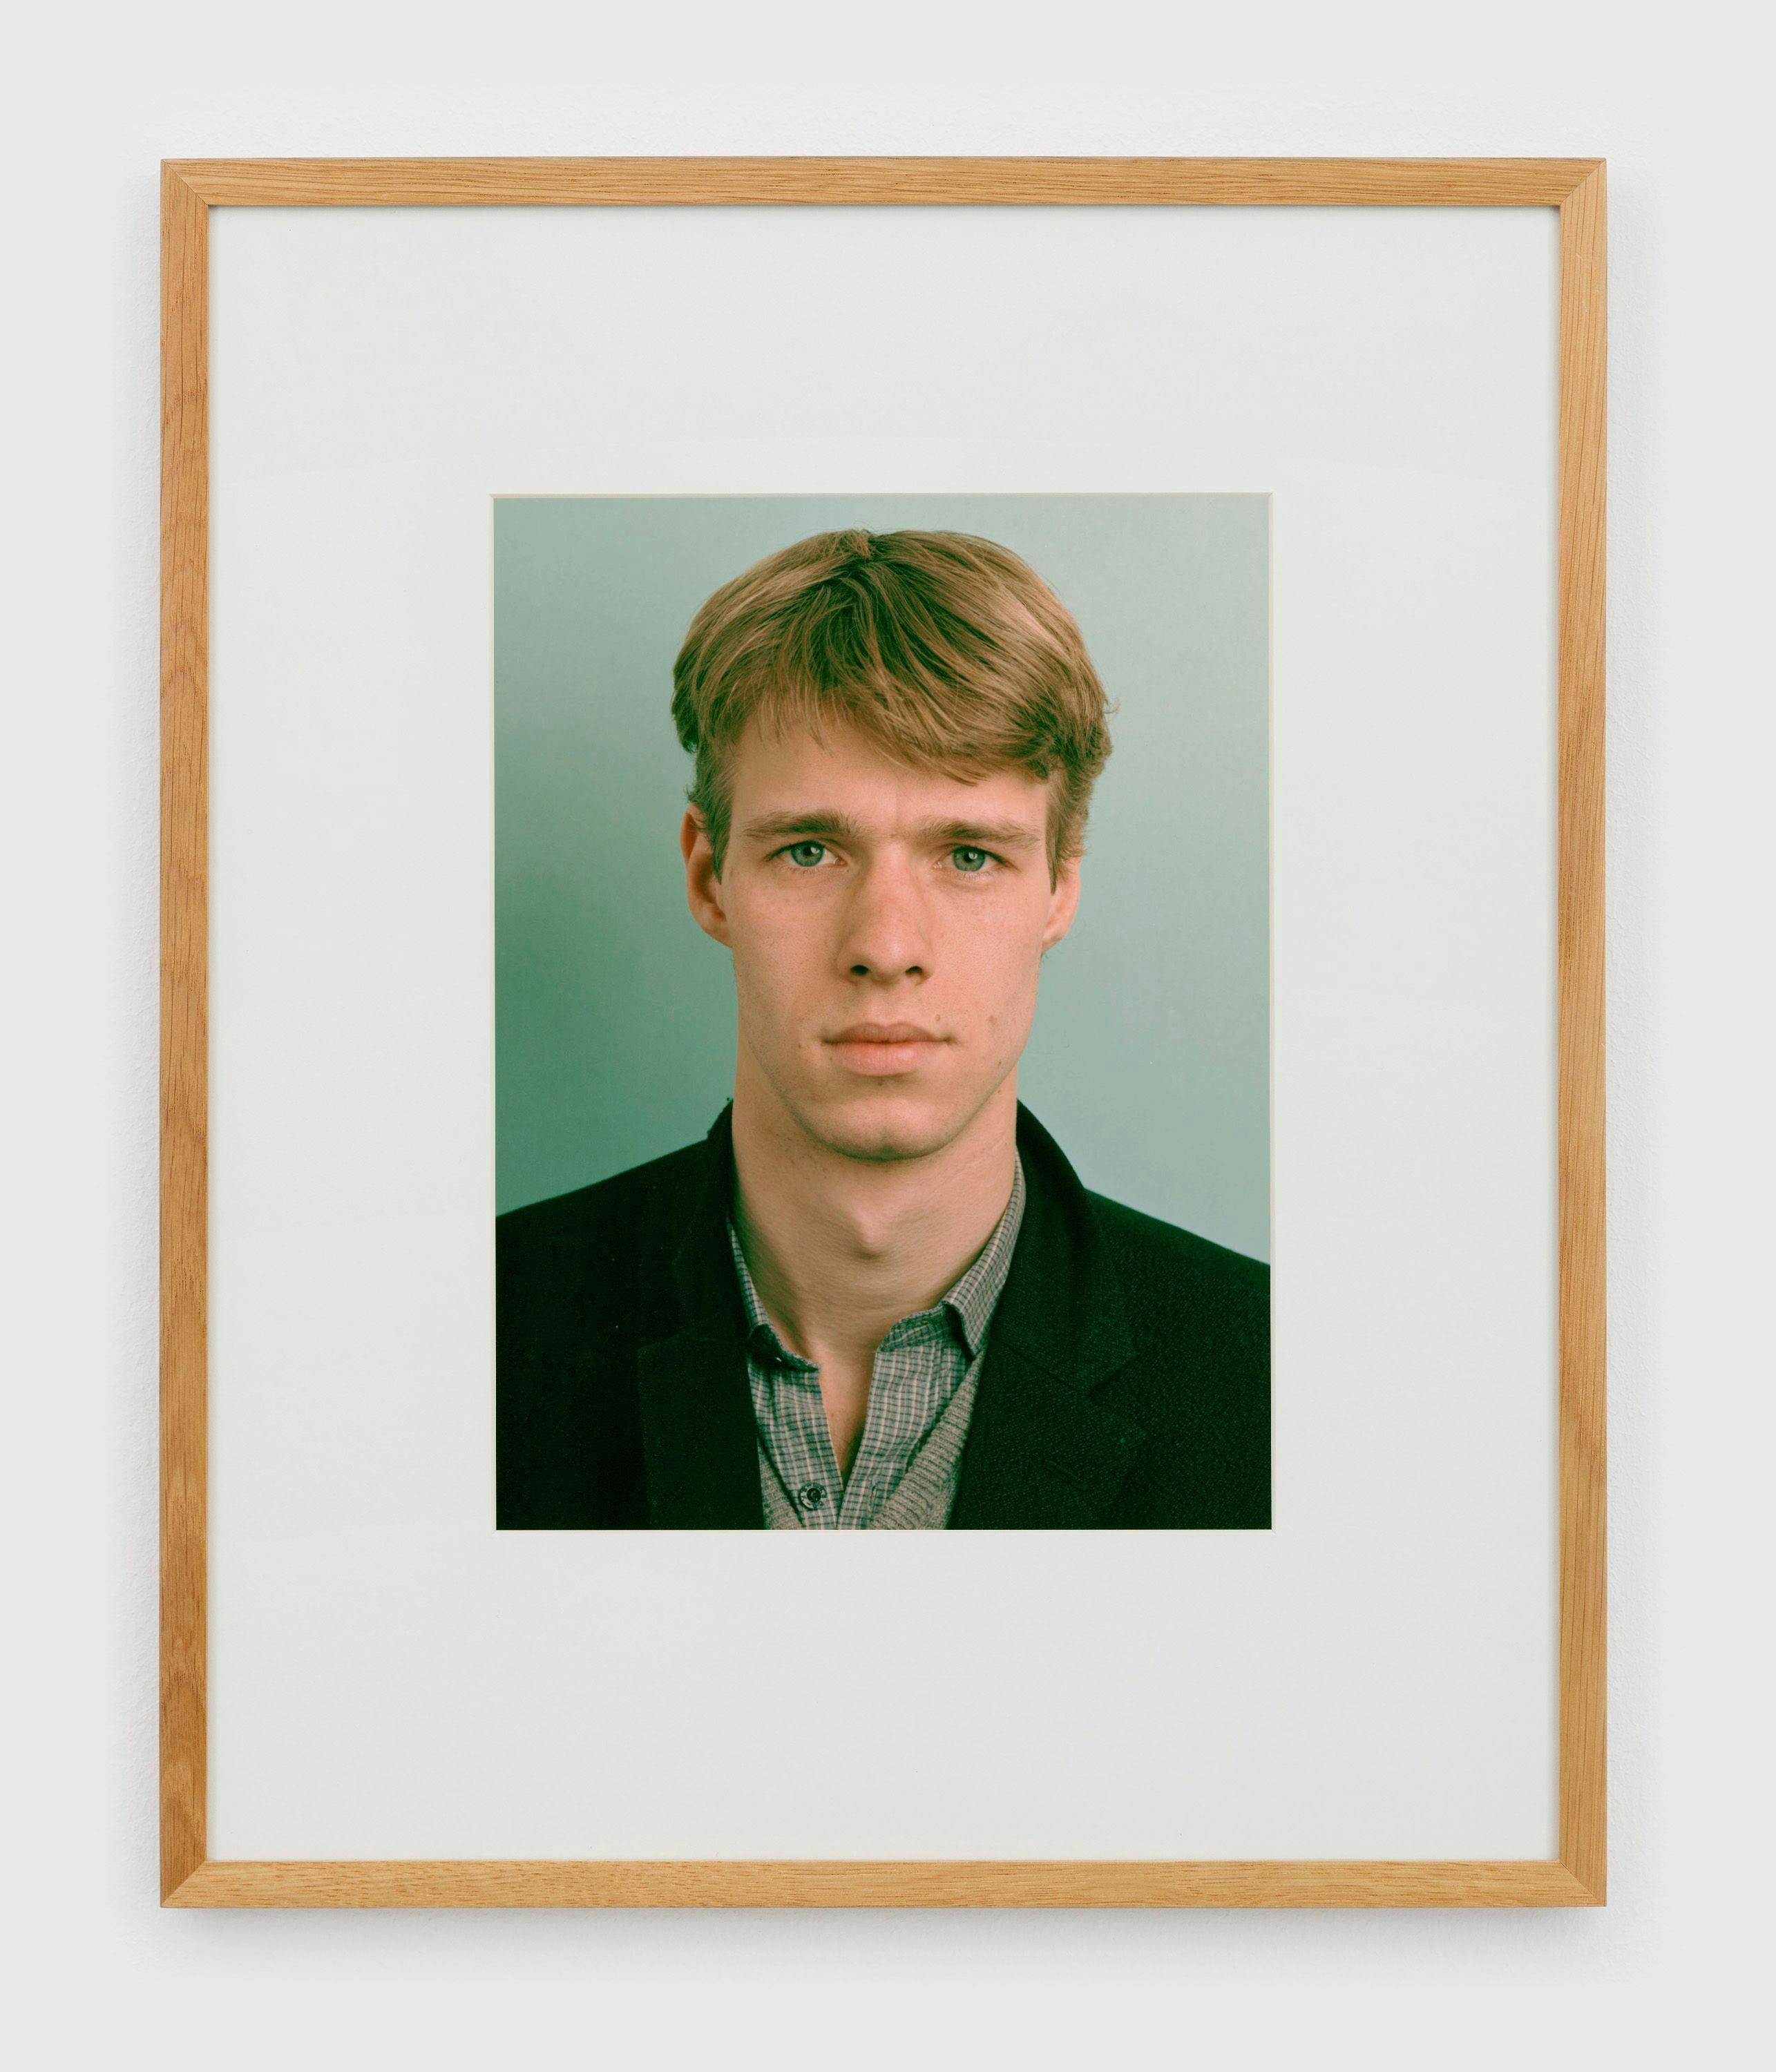 A photograph by Thomas Ruff, titled Porträt (M. Schwenk), dated 1984.